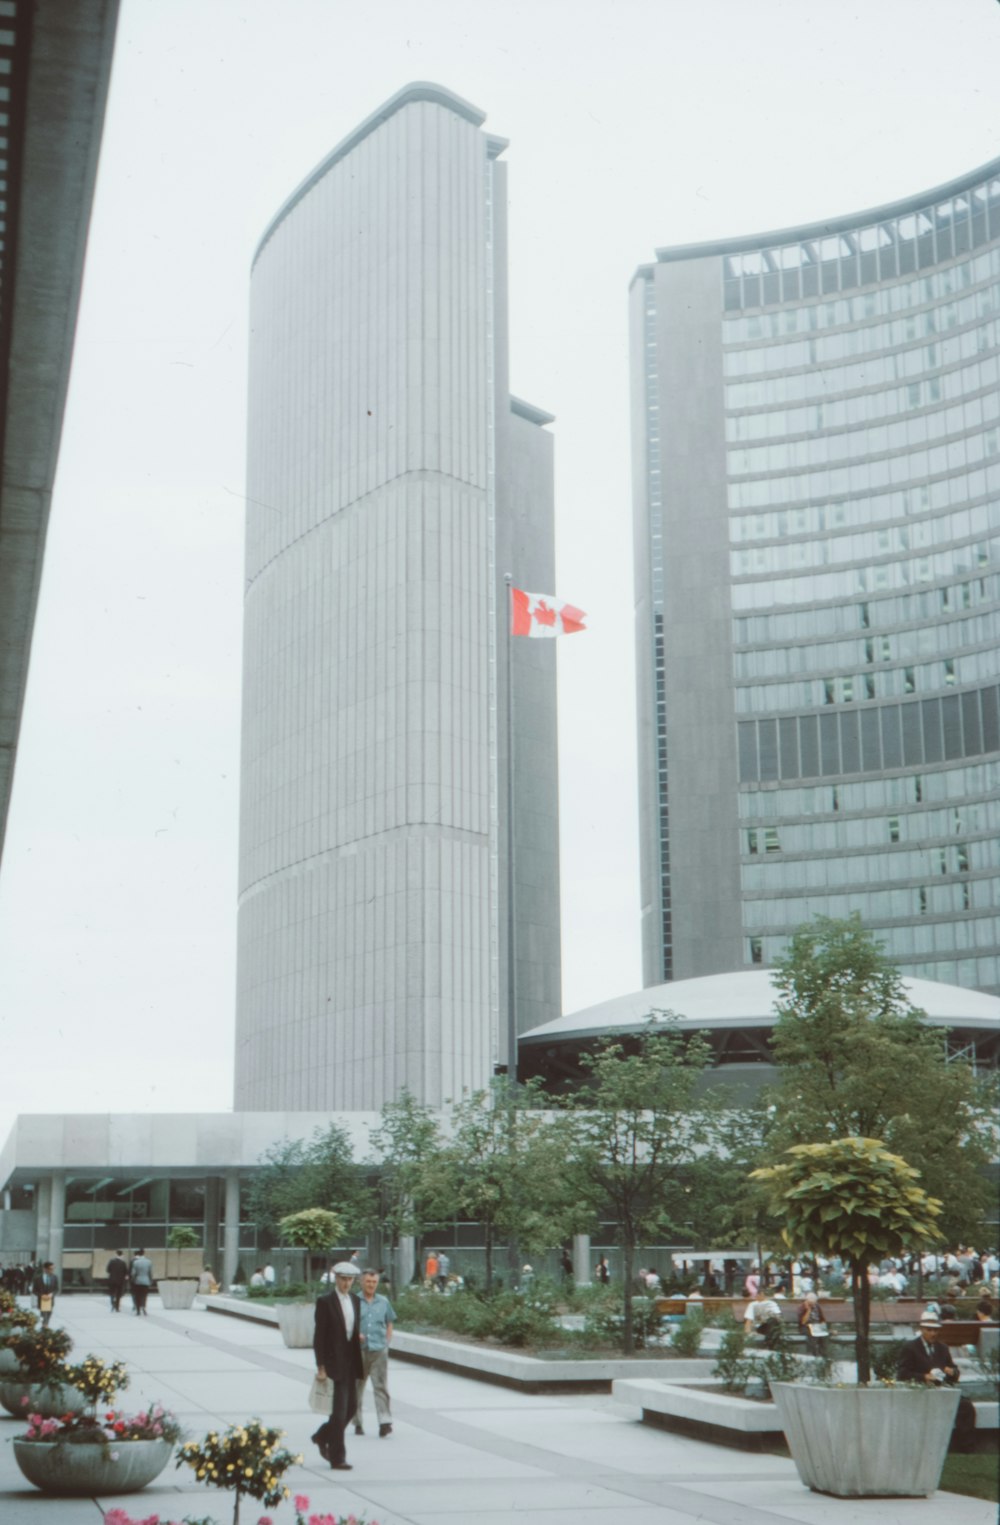 a man in a suit and tie walking in front of a tall building